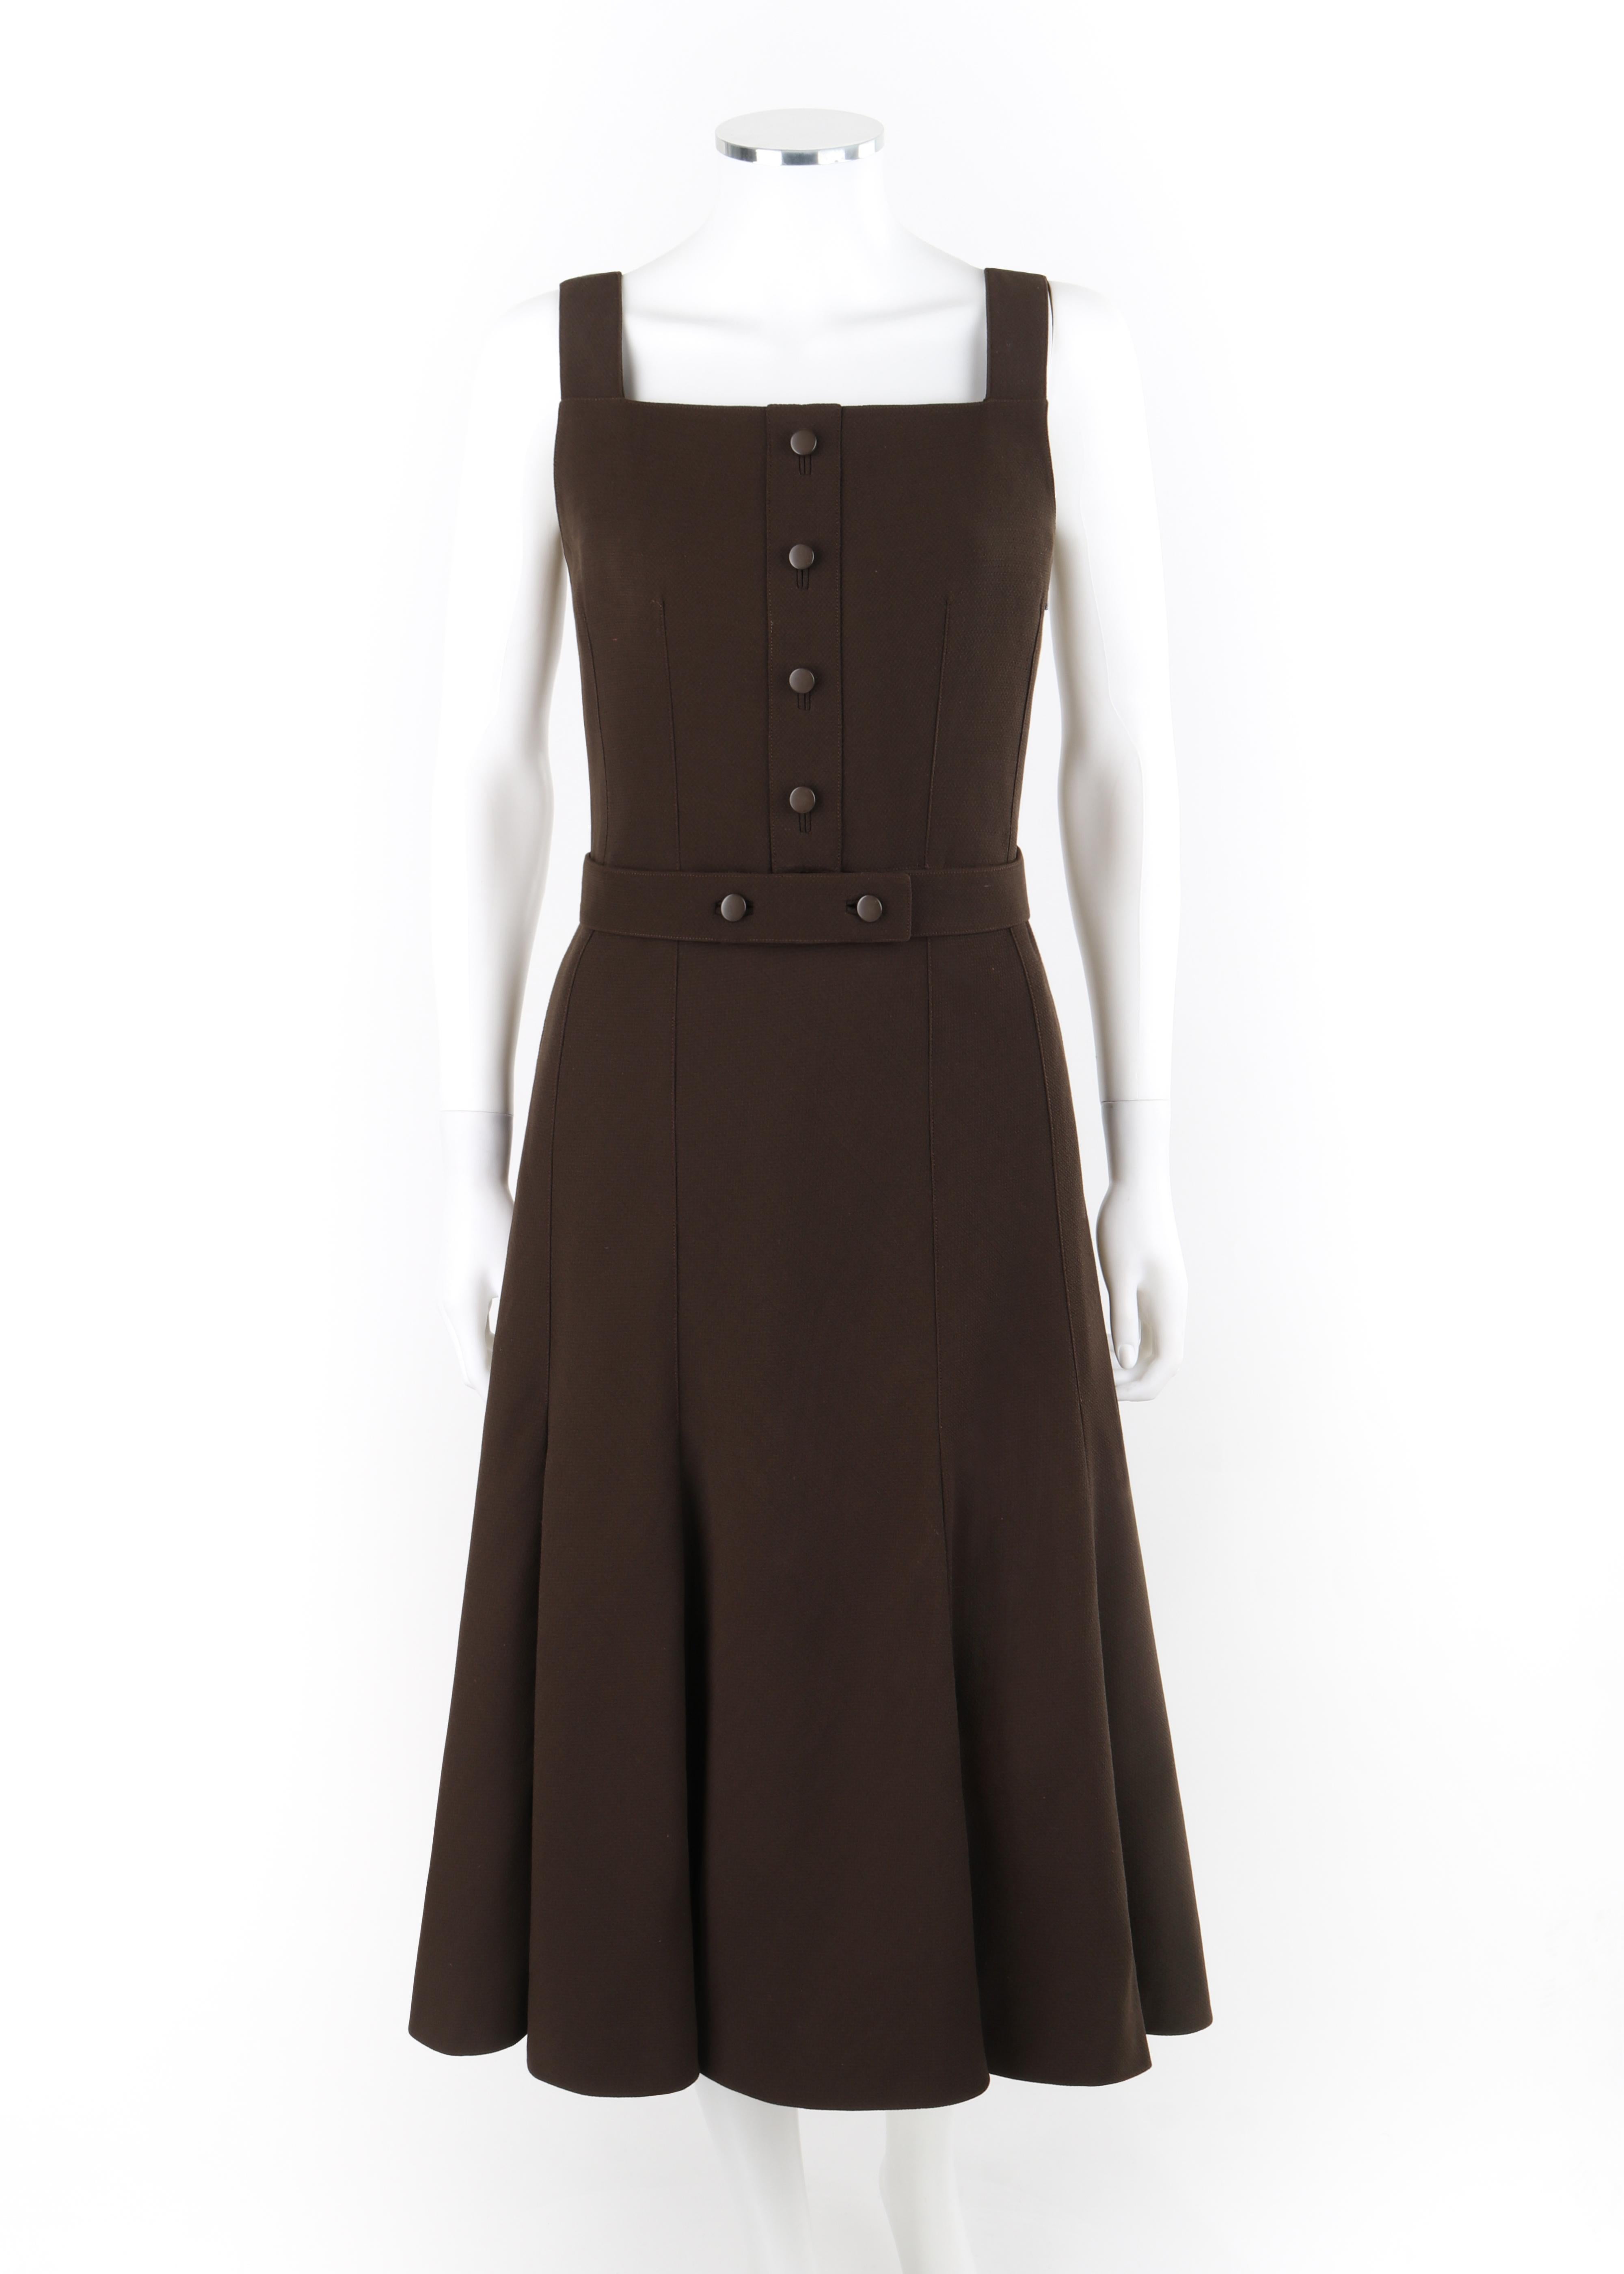 Brand / Manufacturer: Courreges
Circa: 1970s
Style: Fit & Flare Dress
Color(s): Shades of brown
Lined: Yes
Marked Fabric Content: 